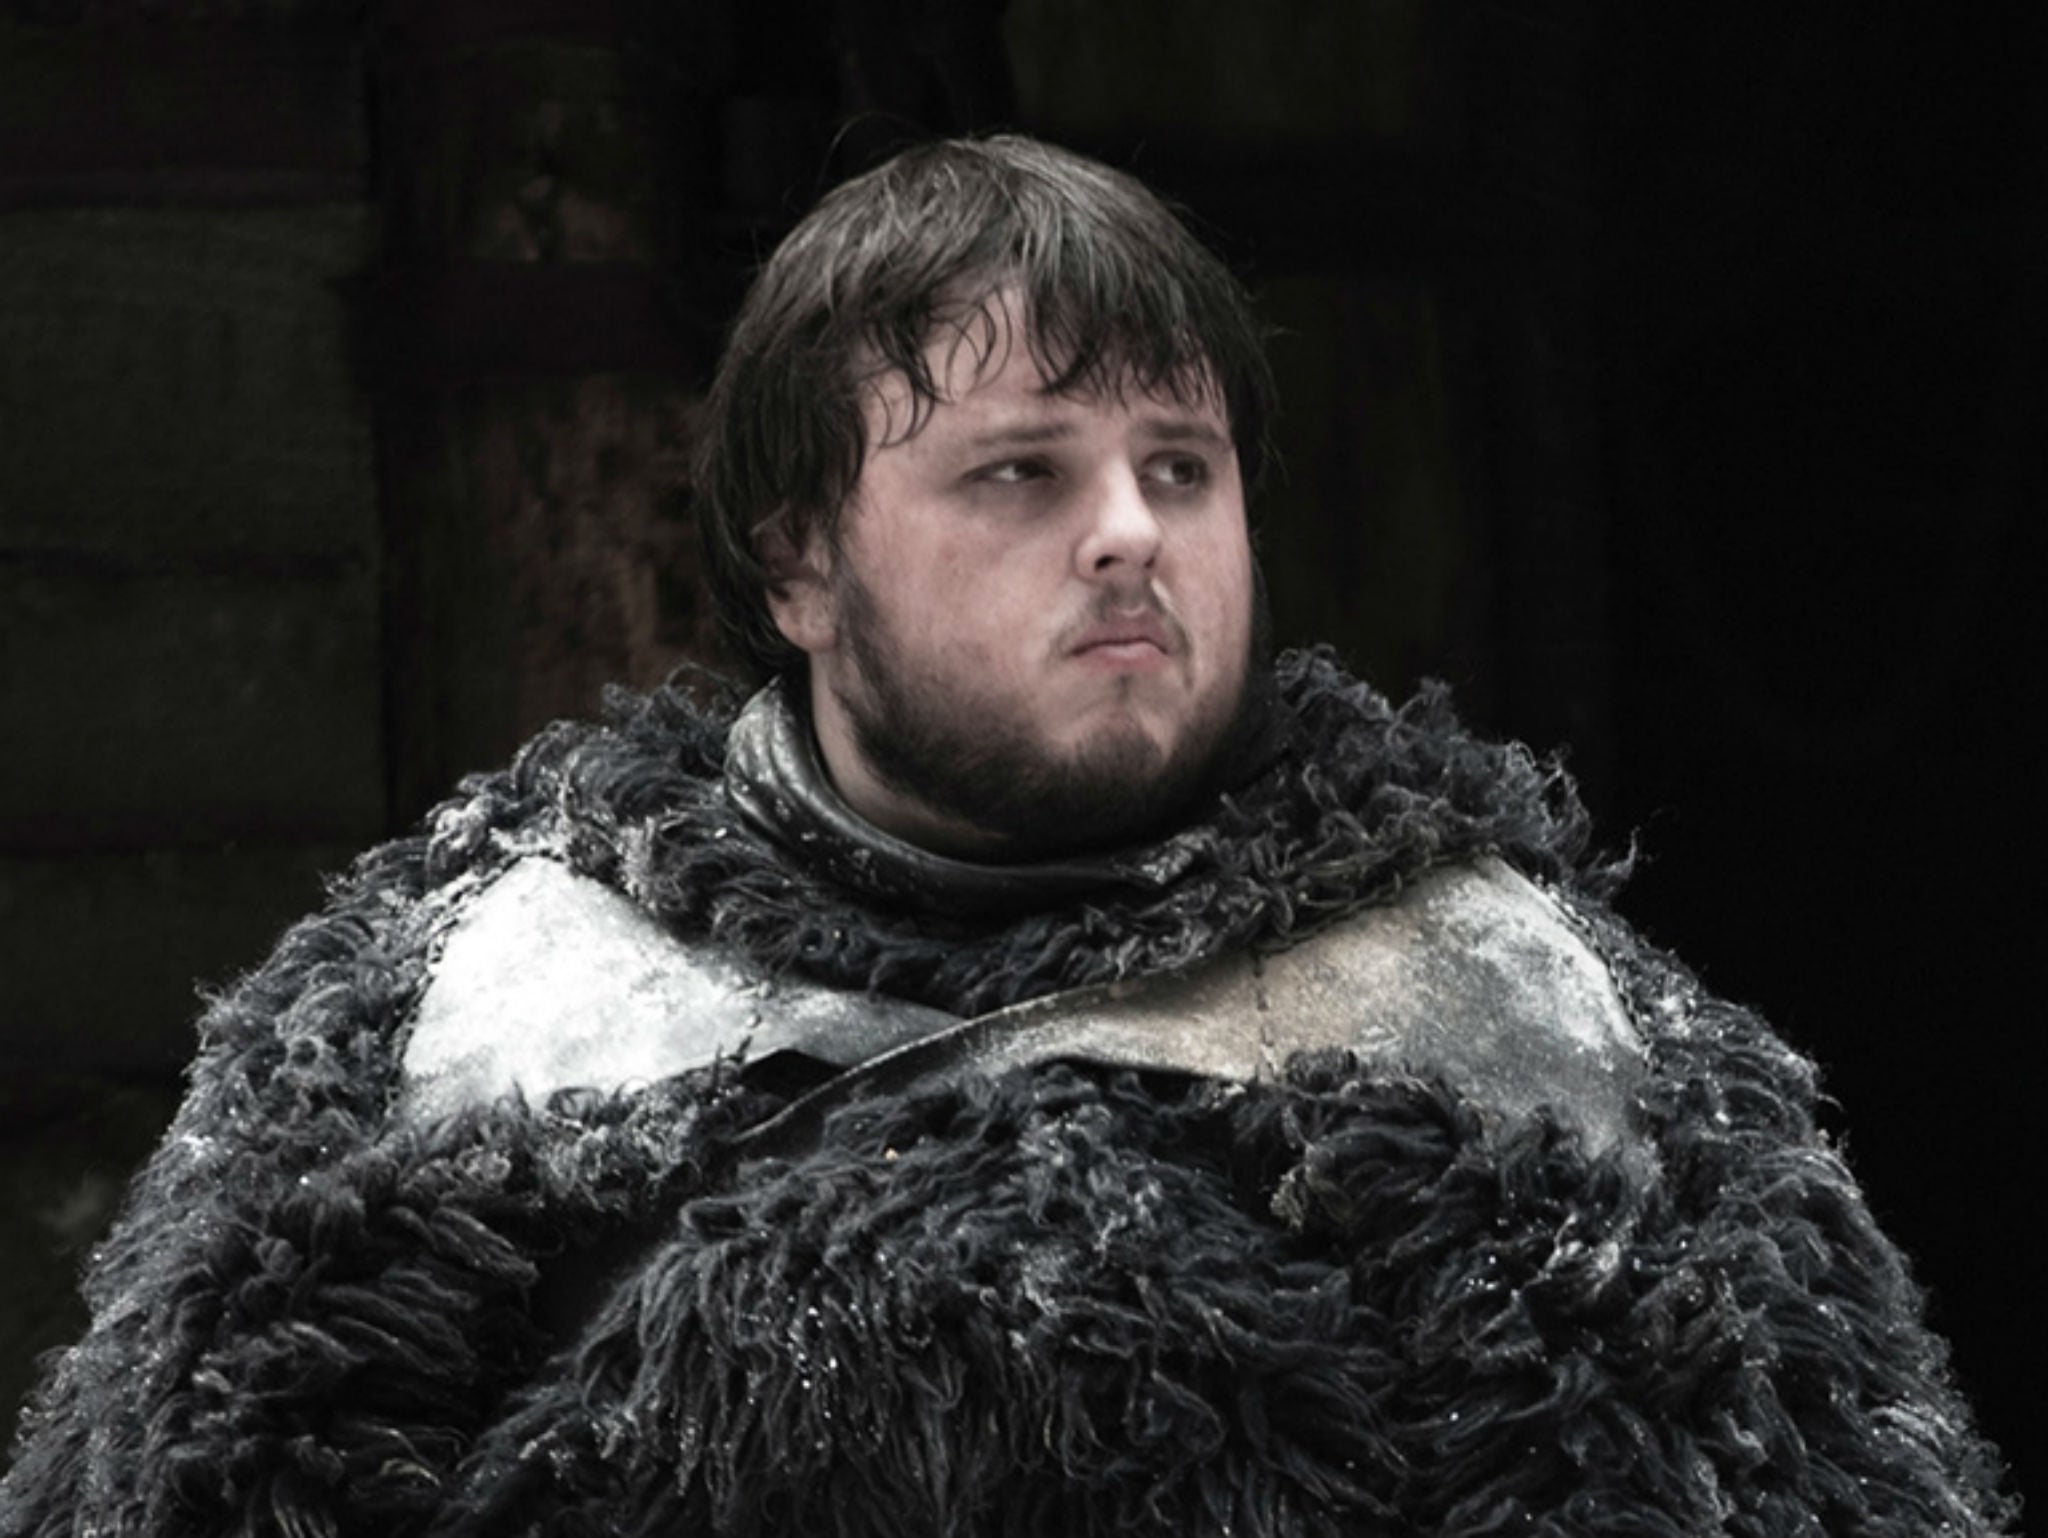 Game of Thrones' Sam Tarly